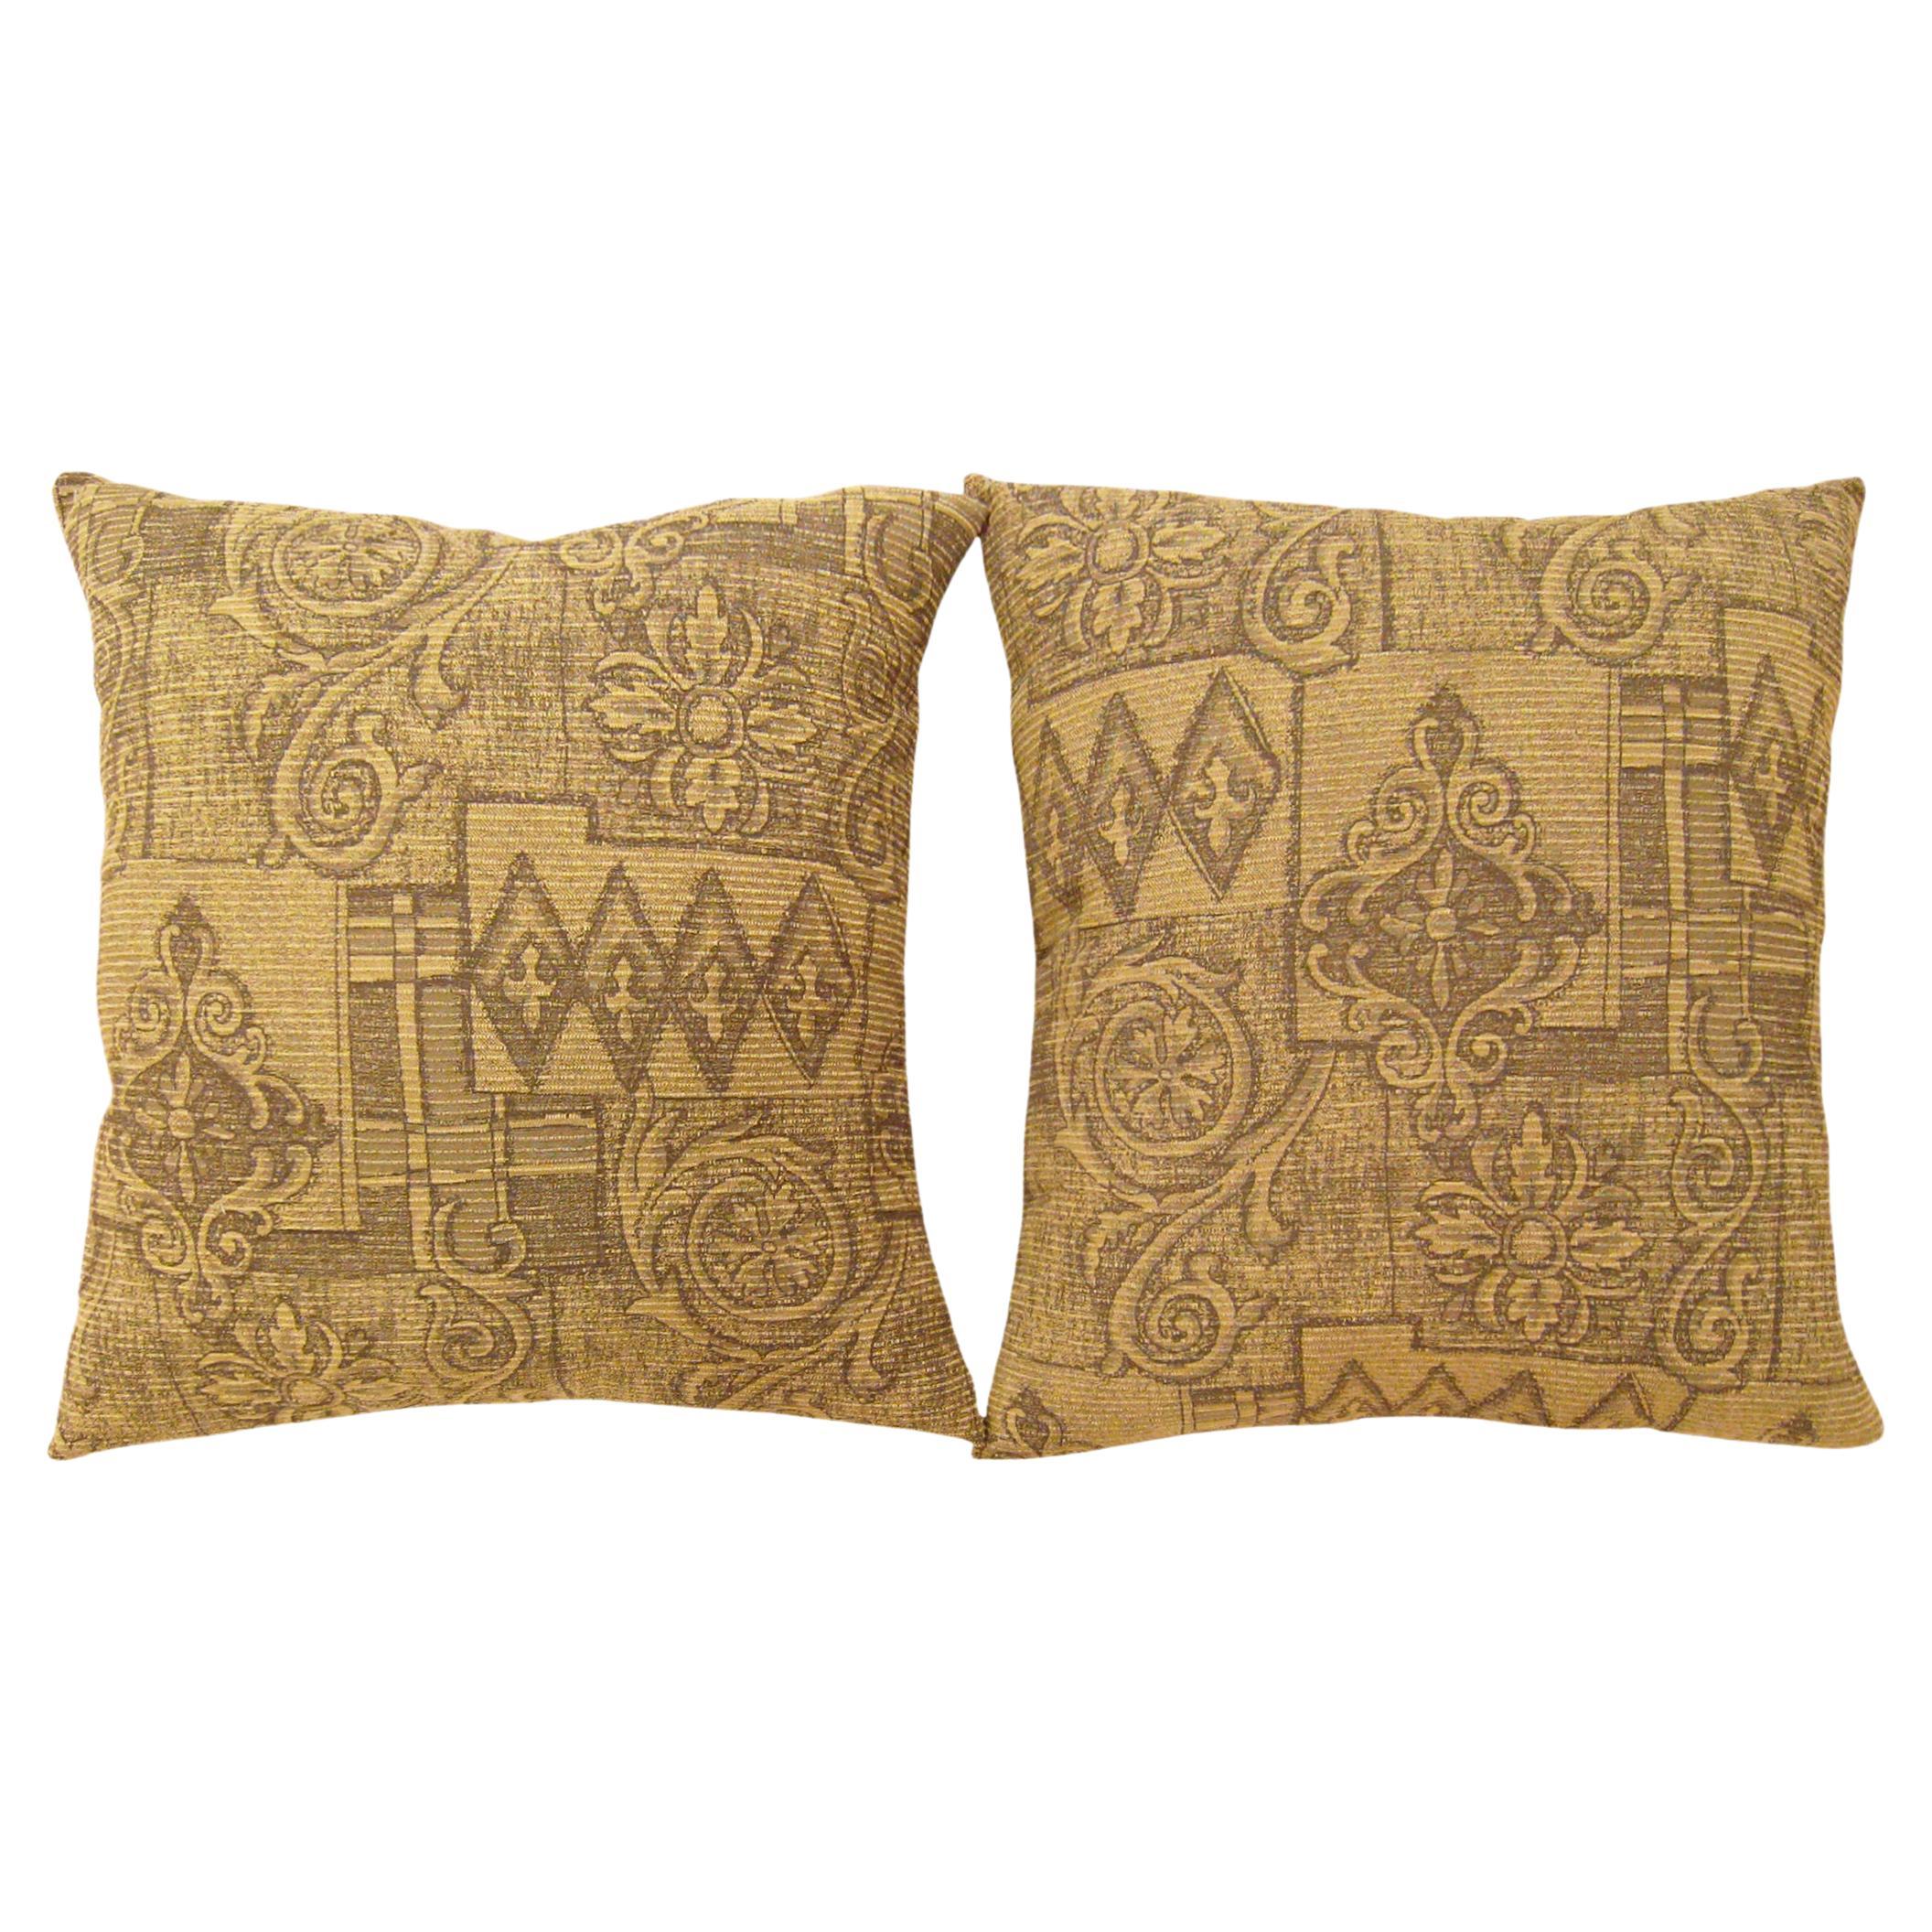 Pair of Decorative Vintage Floro-Geometric Fabric Pillows For Sale